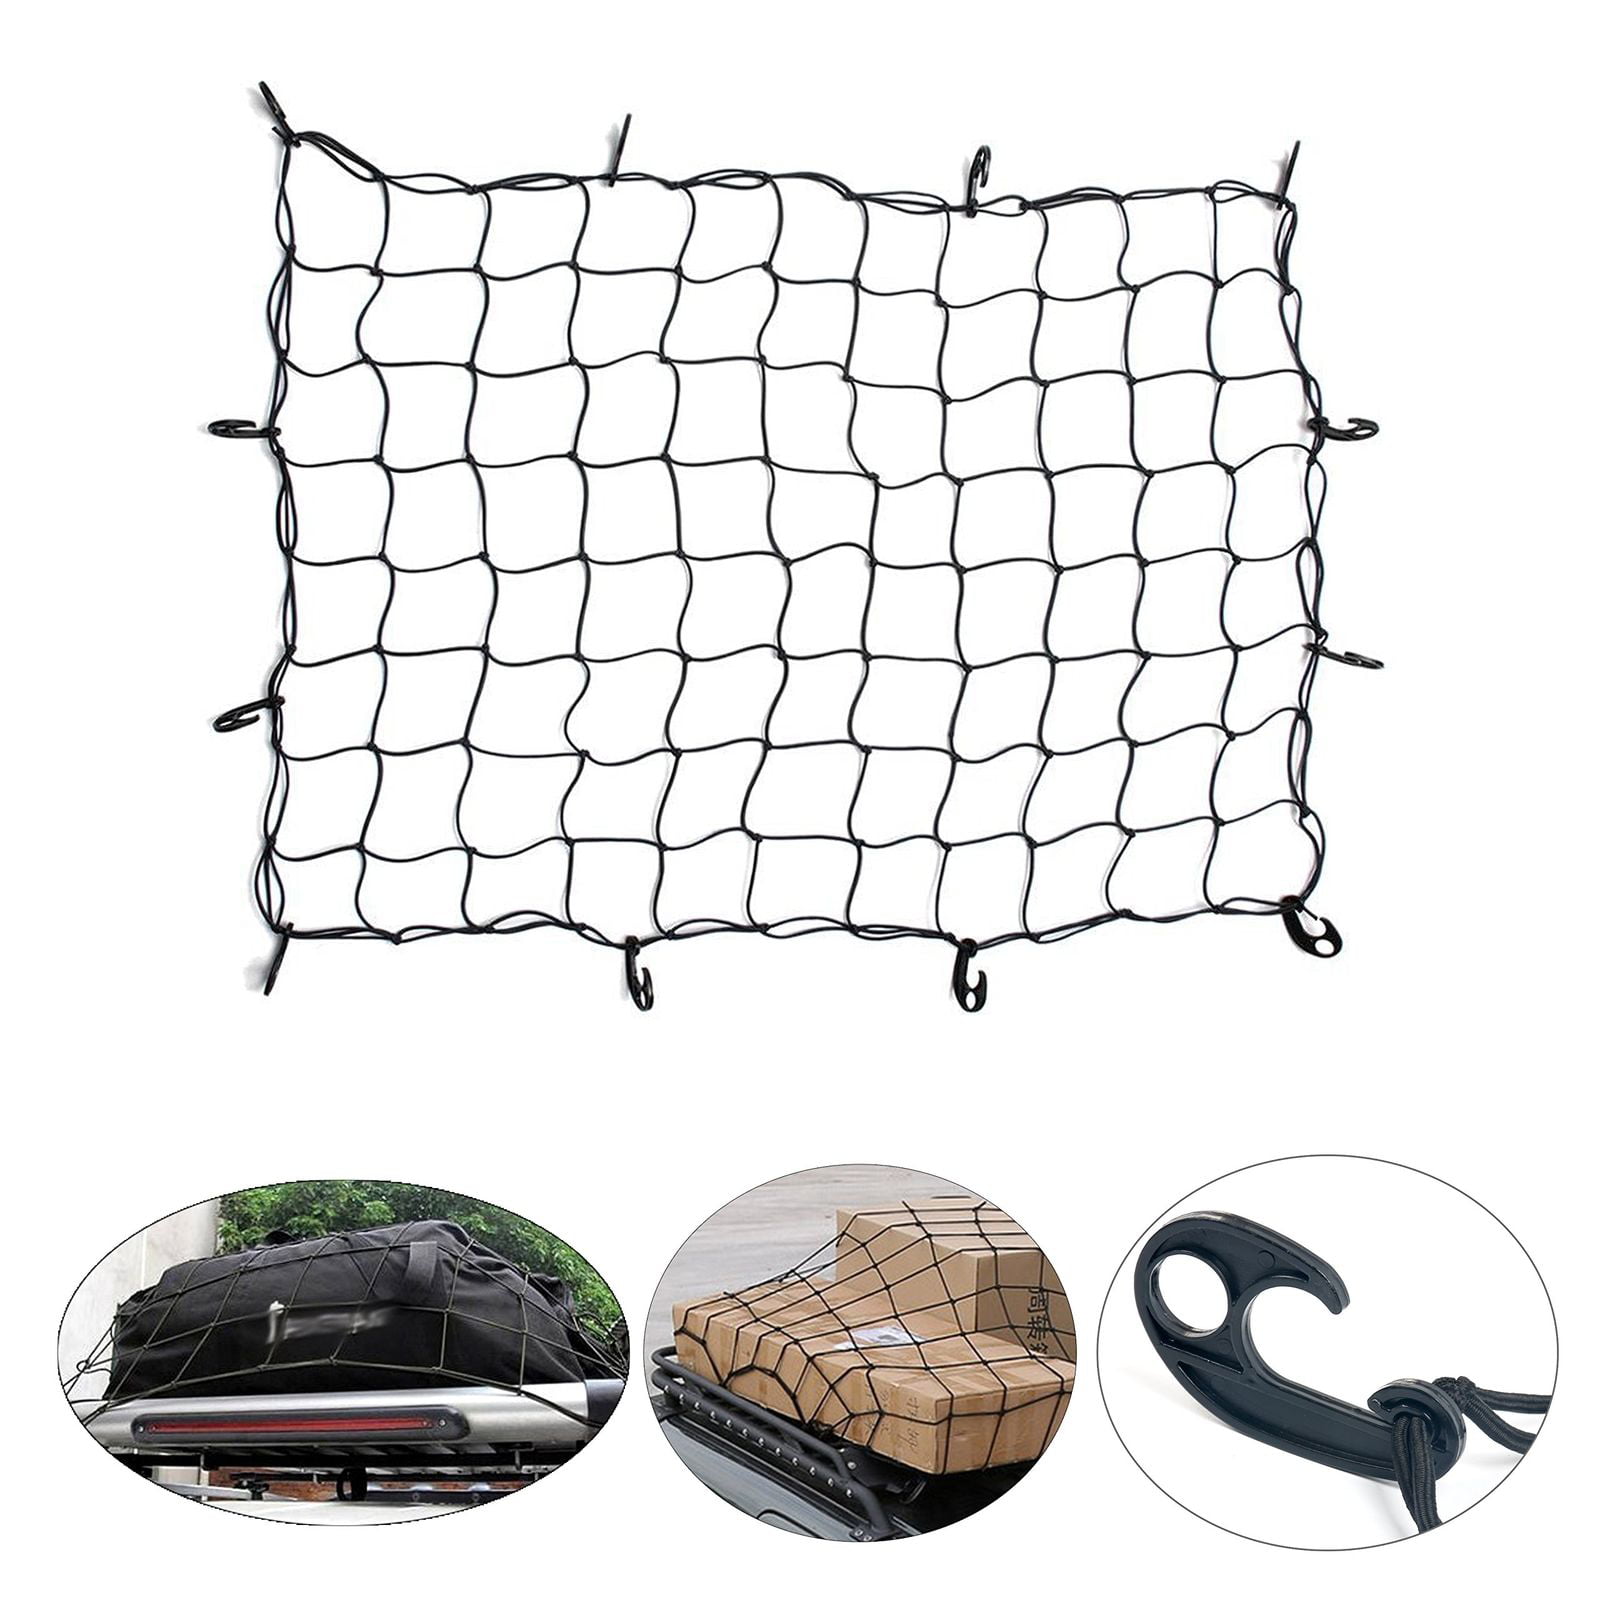 Truck Bed Netting with 12 Hooks Cargo Rack Rooftop 51” x 39” DUEBEL Cargo Net for Pickup Truck Bed 4” x 5” Grid Mesh Cargo Net 